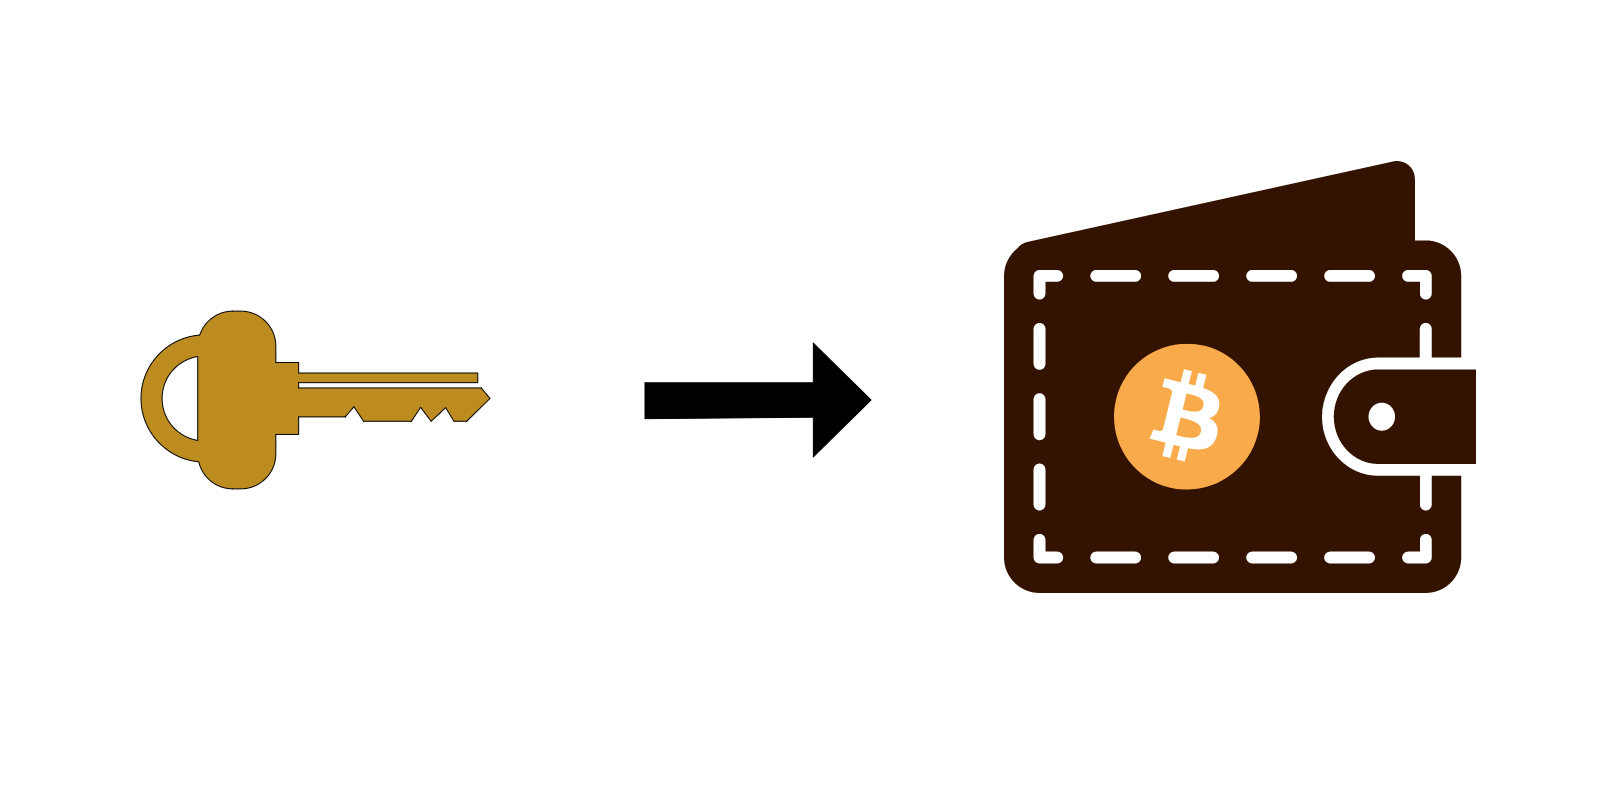 Bitcoin login with private key, Uždarbis.lt: Bitcoin private key - Uždarbis.lt